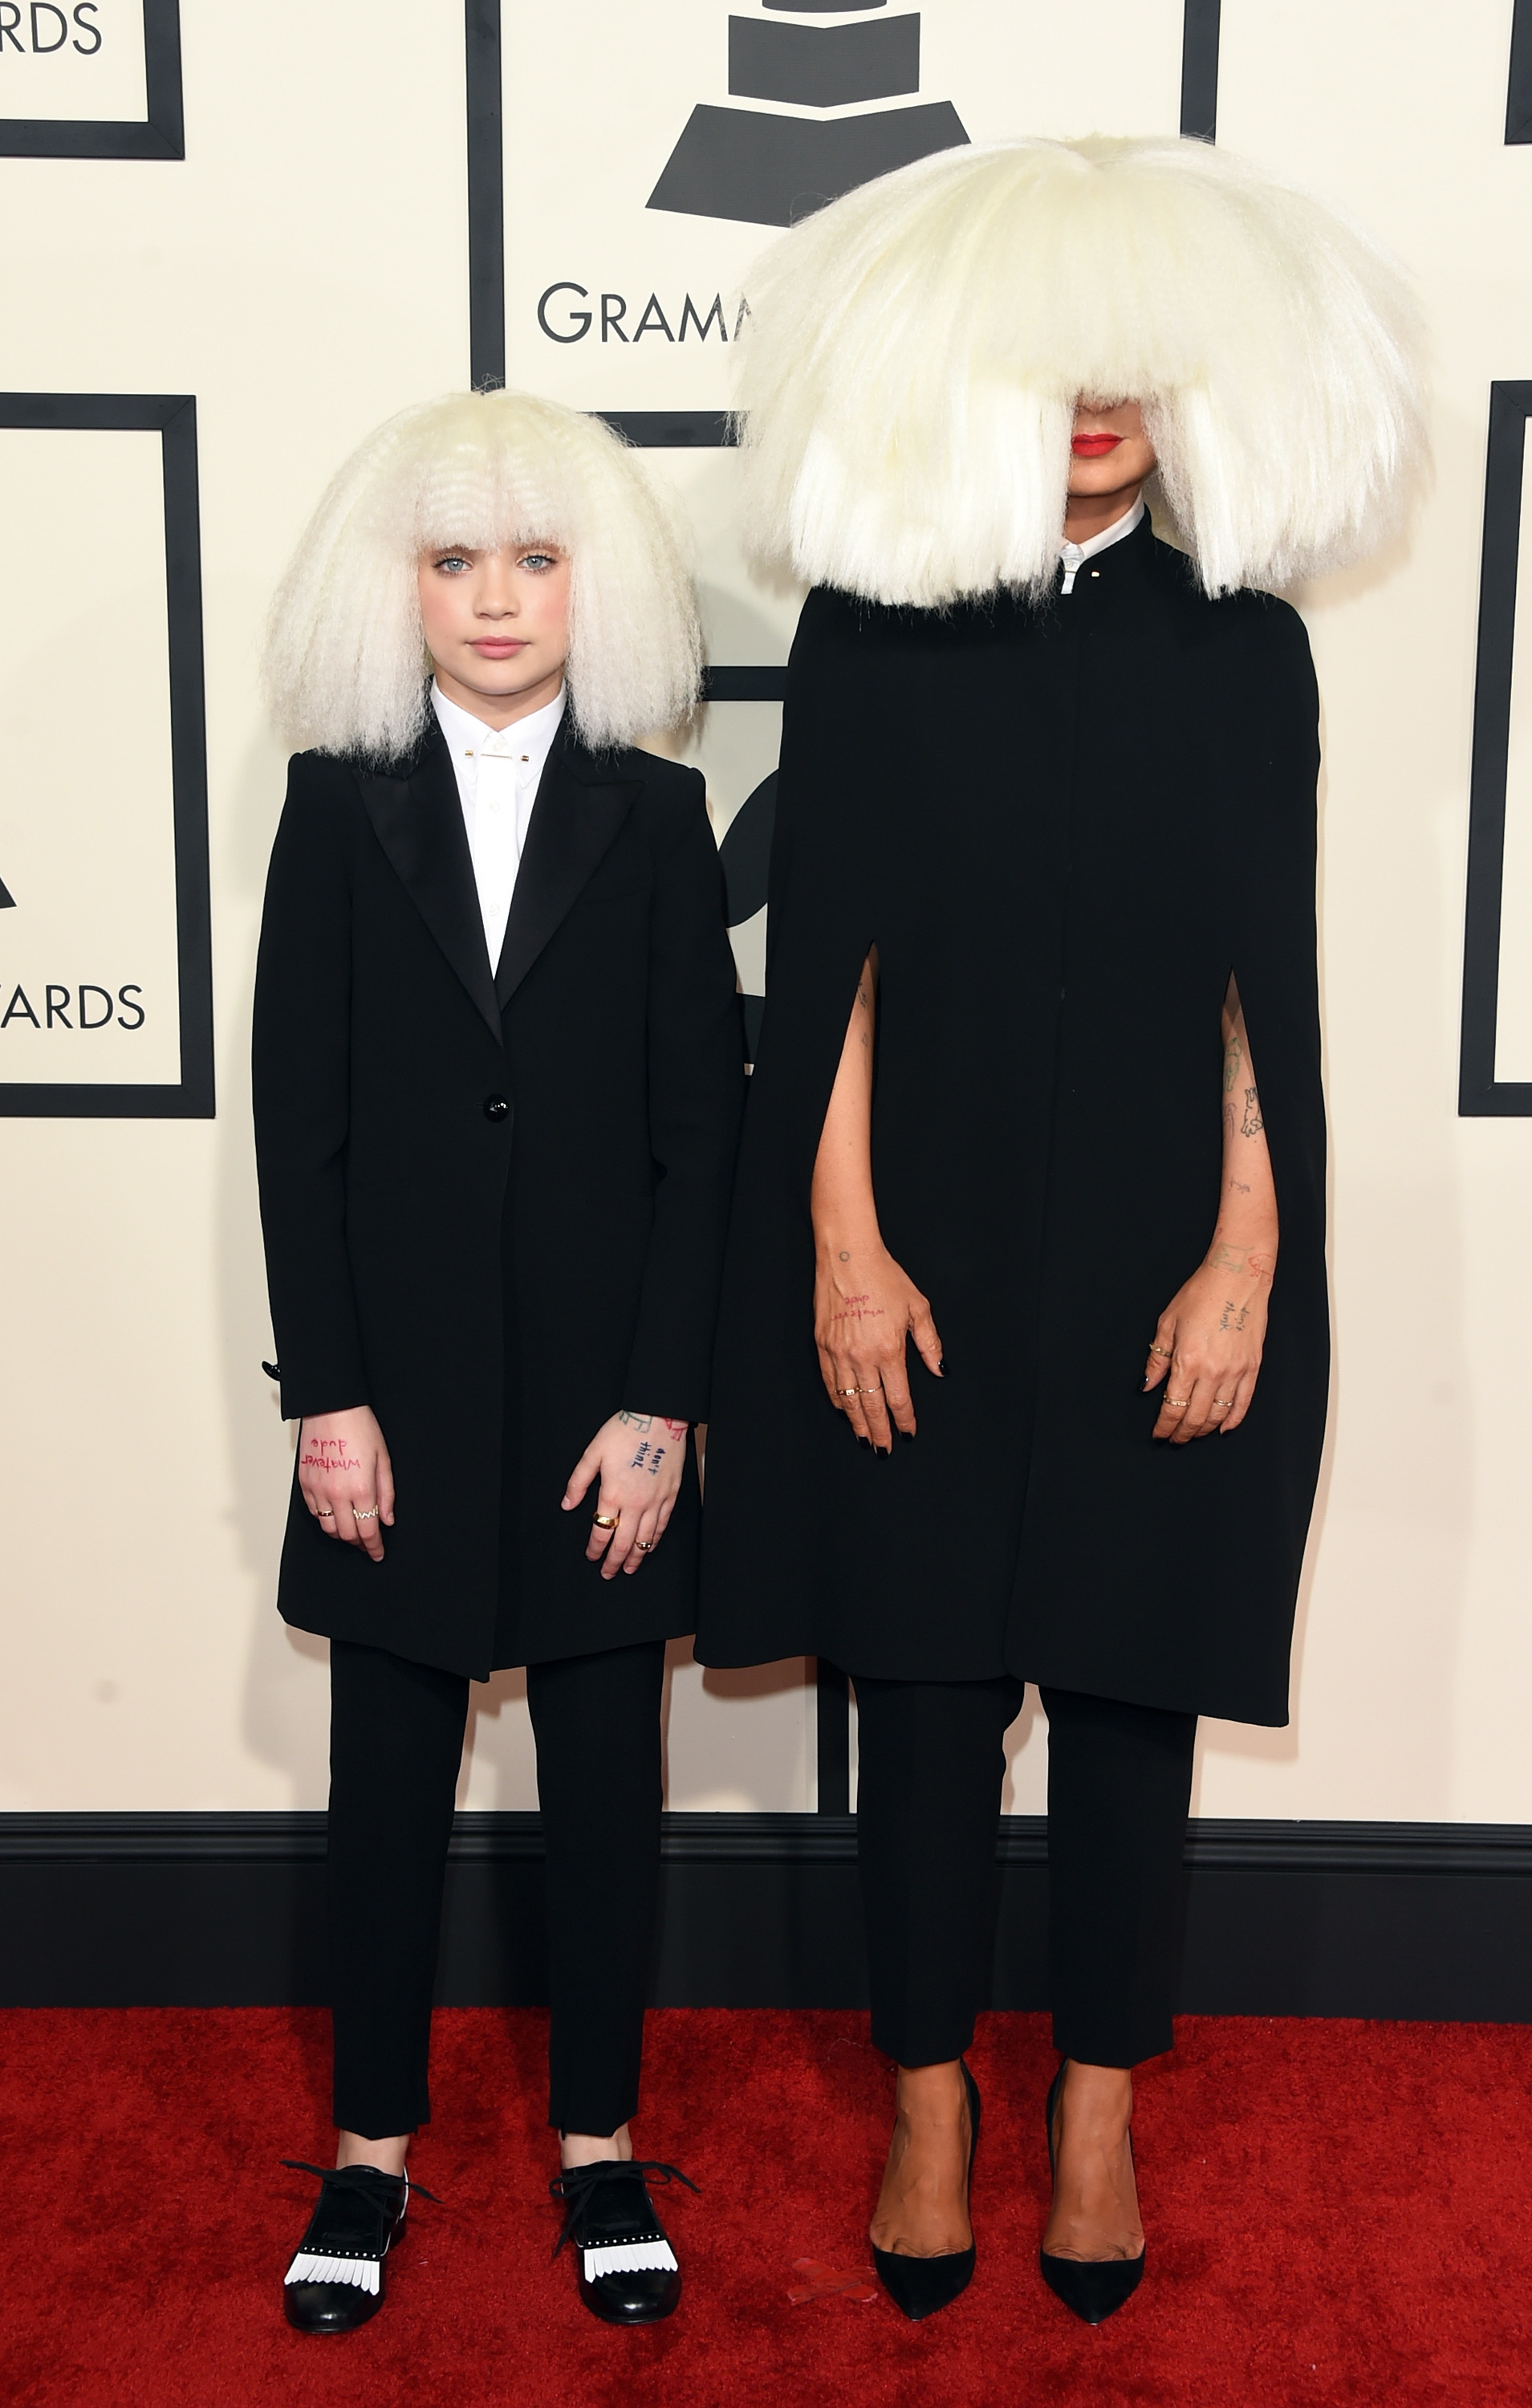 Maddie and Sia pose together on the red carpet in matching jackets, pencil pants, and hair